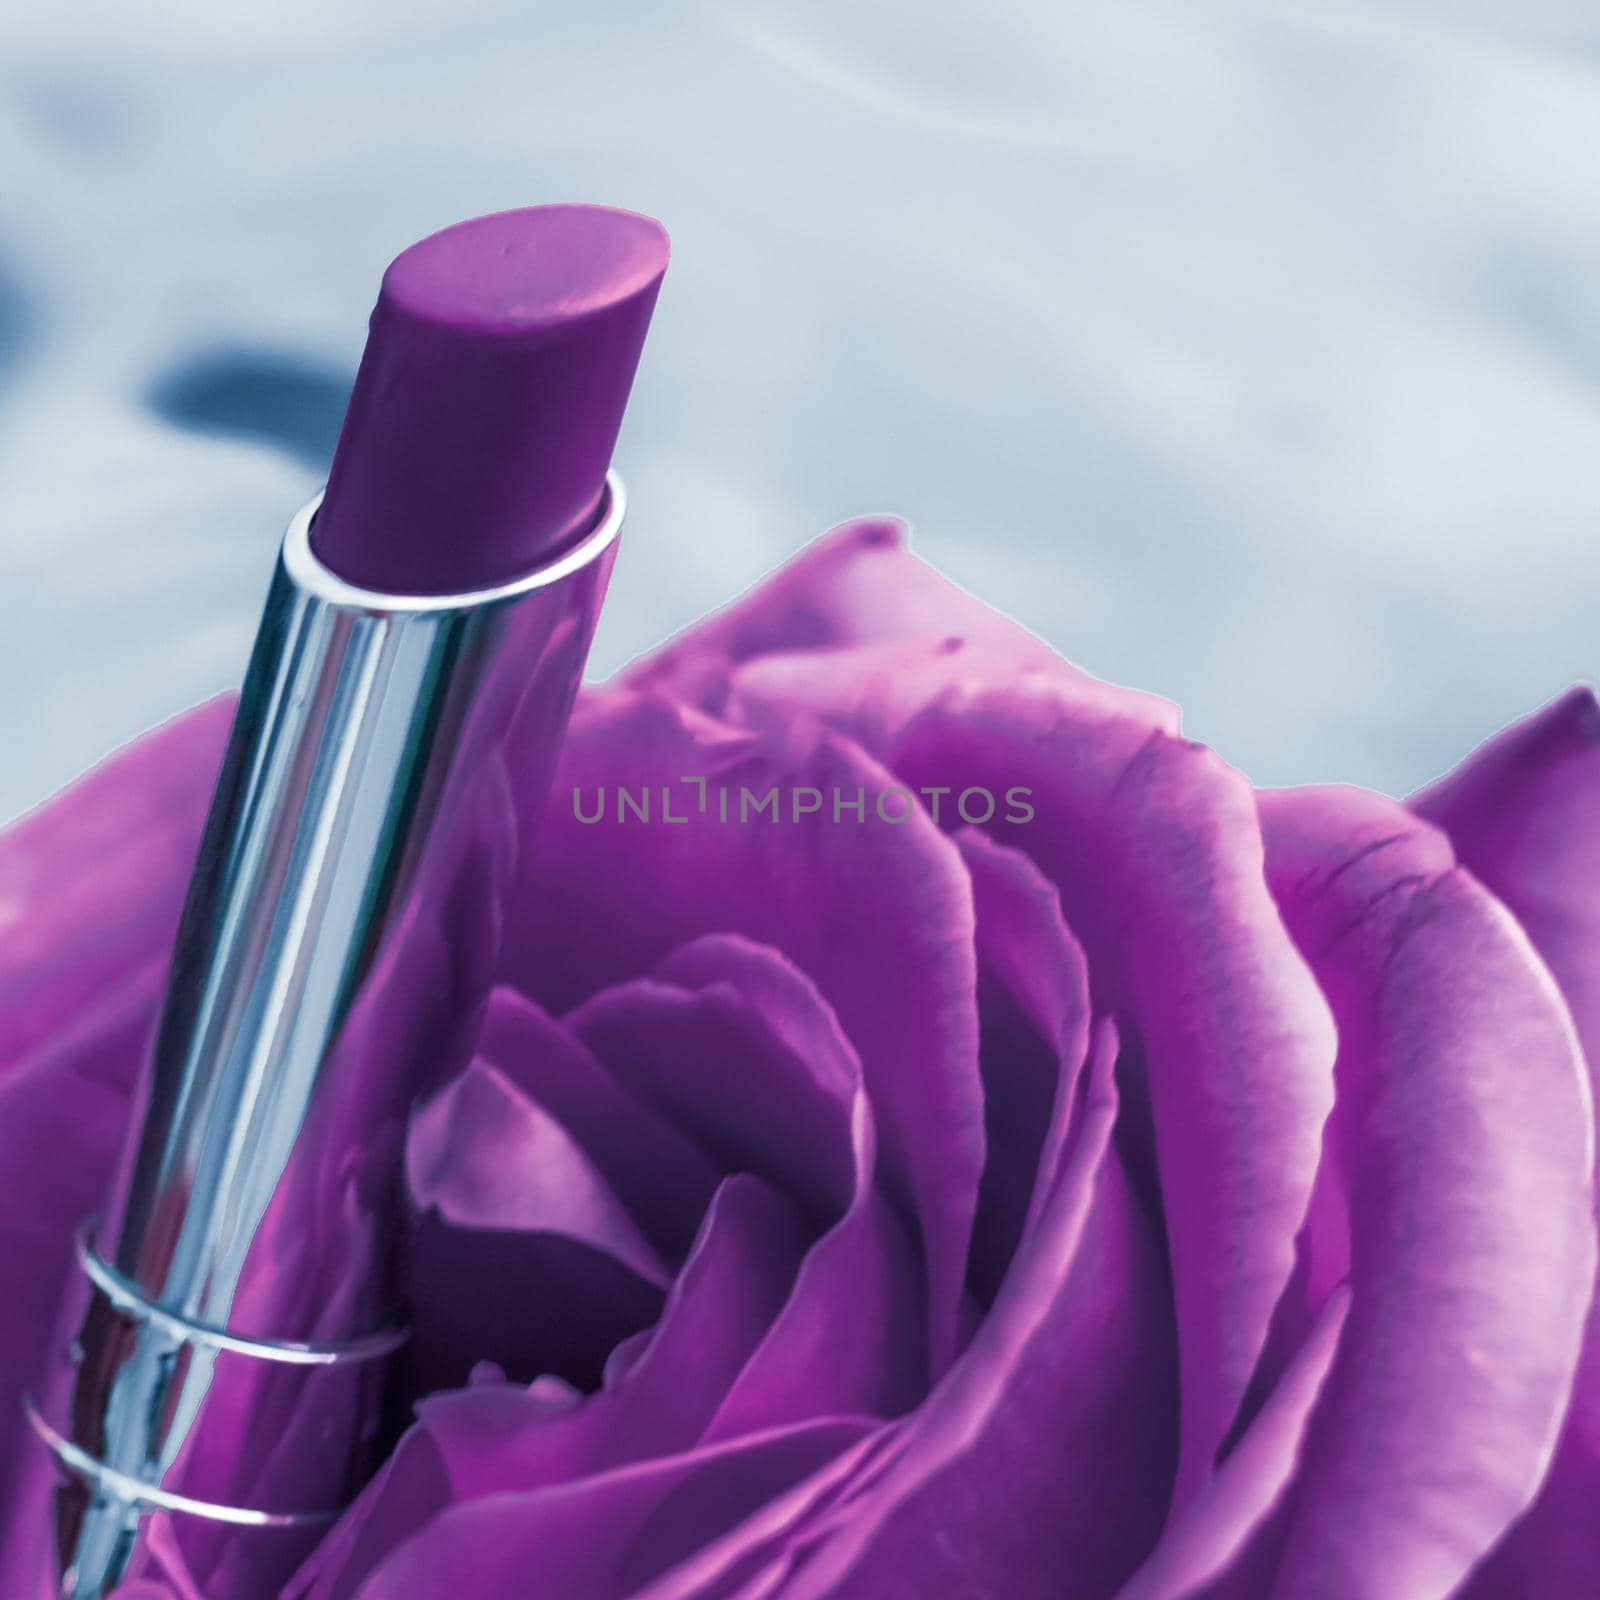 Purple lipstick and rose flower on liquid background, waterproof glamour make-up and lip gloss cosmetics product for luxury beauty brand holiday design by Anneleven